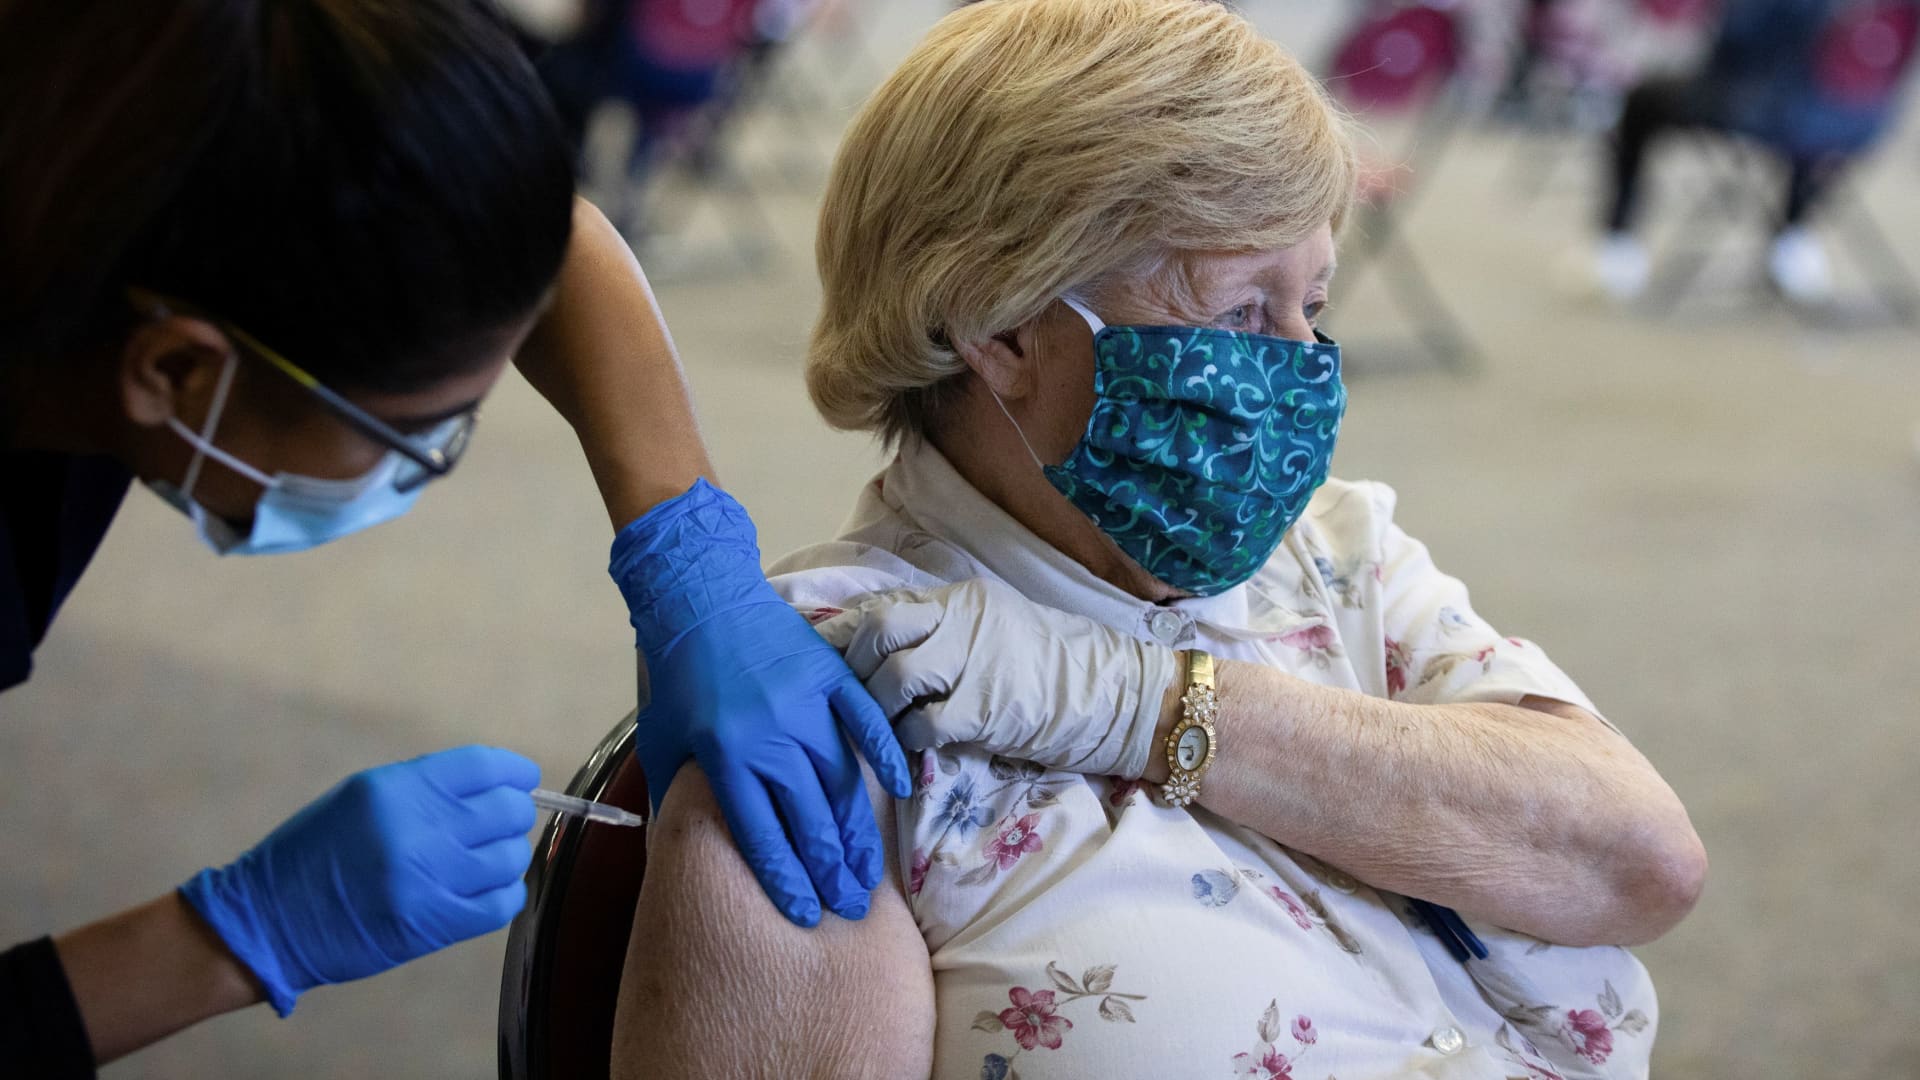 Covid vaccines prevented at least 330,000 deaths among U.S. seniors in 2021